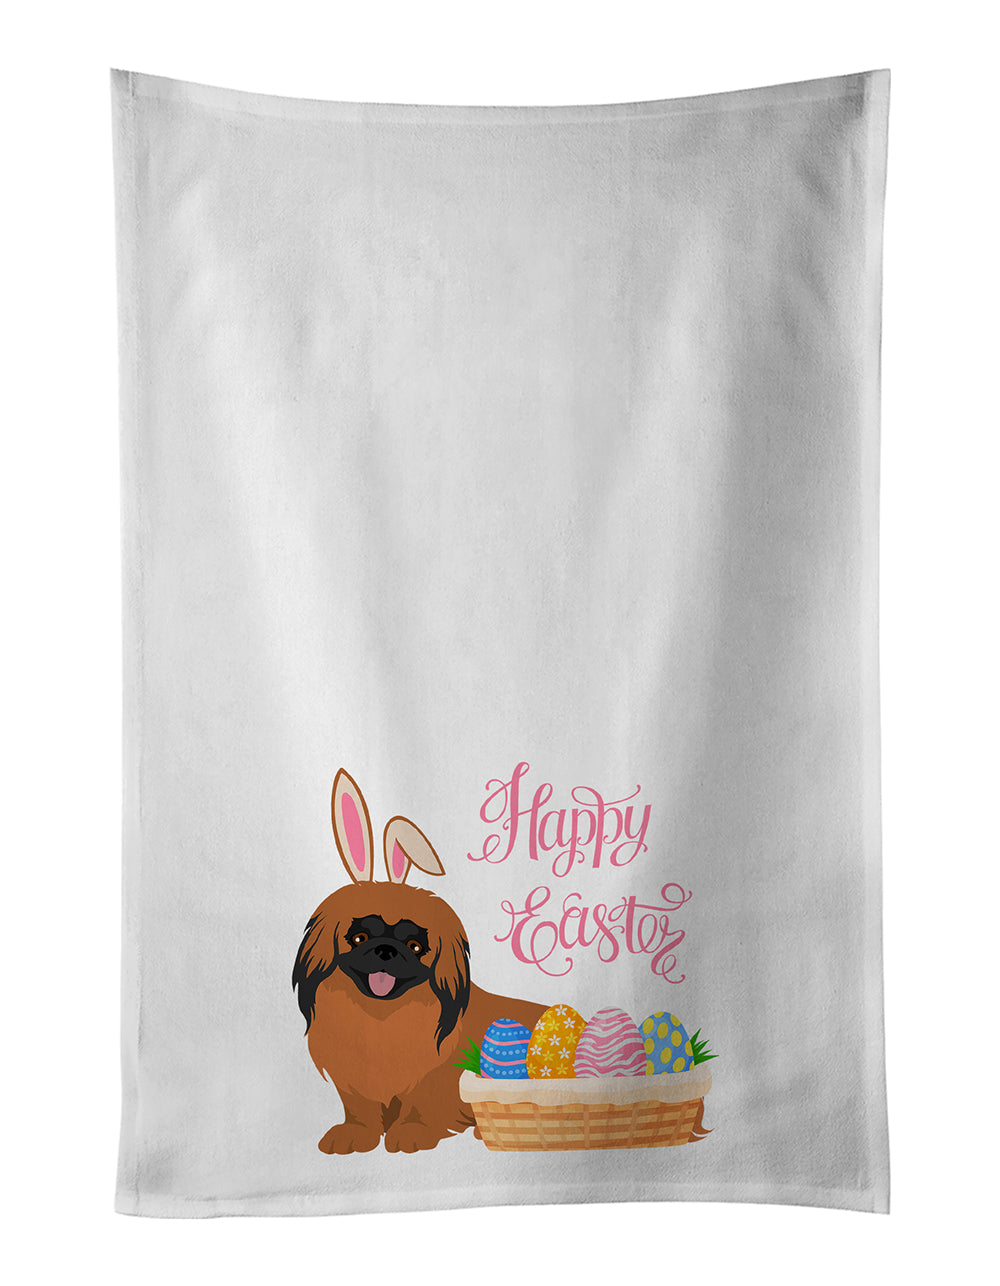 Buy this Red Pekingese Easter White Kitchen Towel Set of 2 Dish Towels